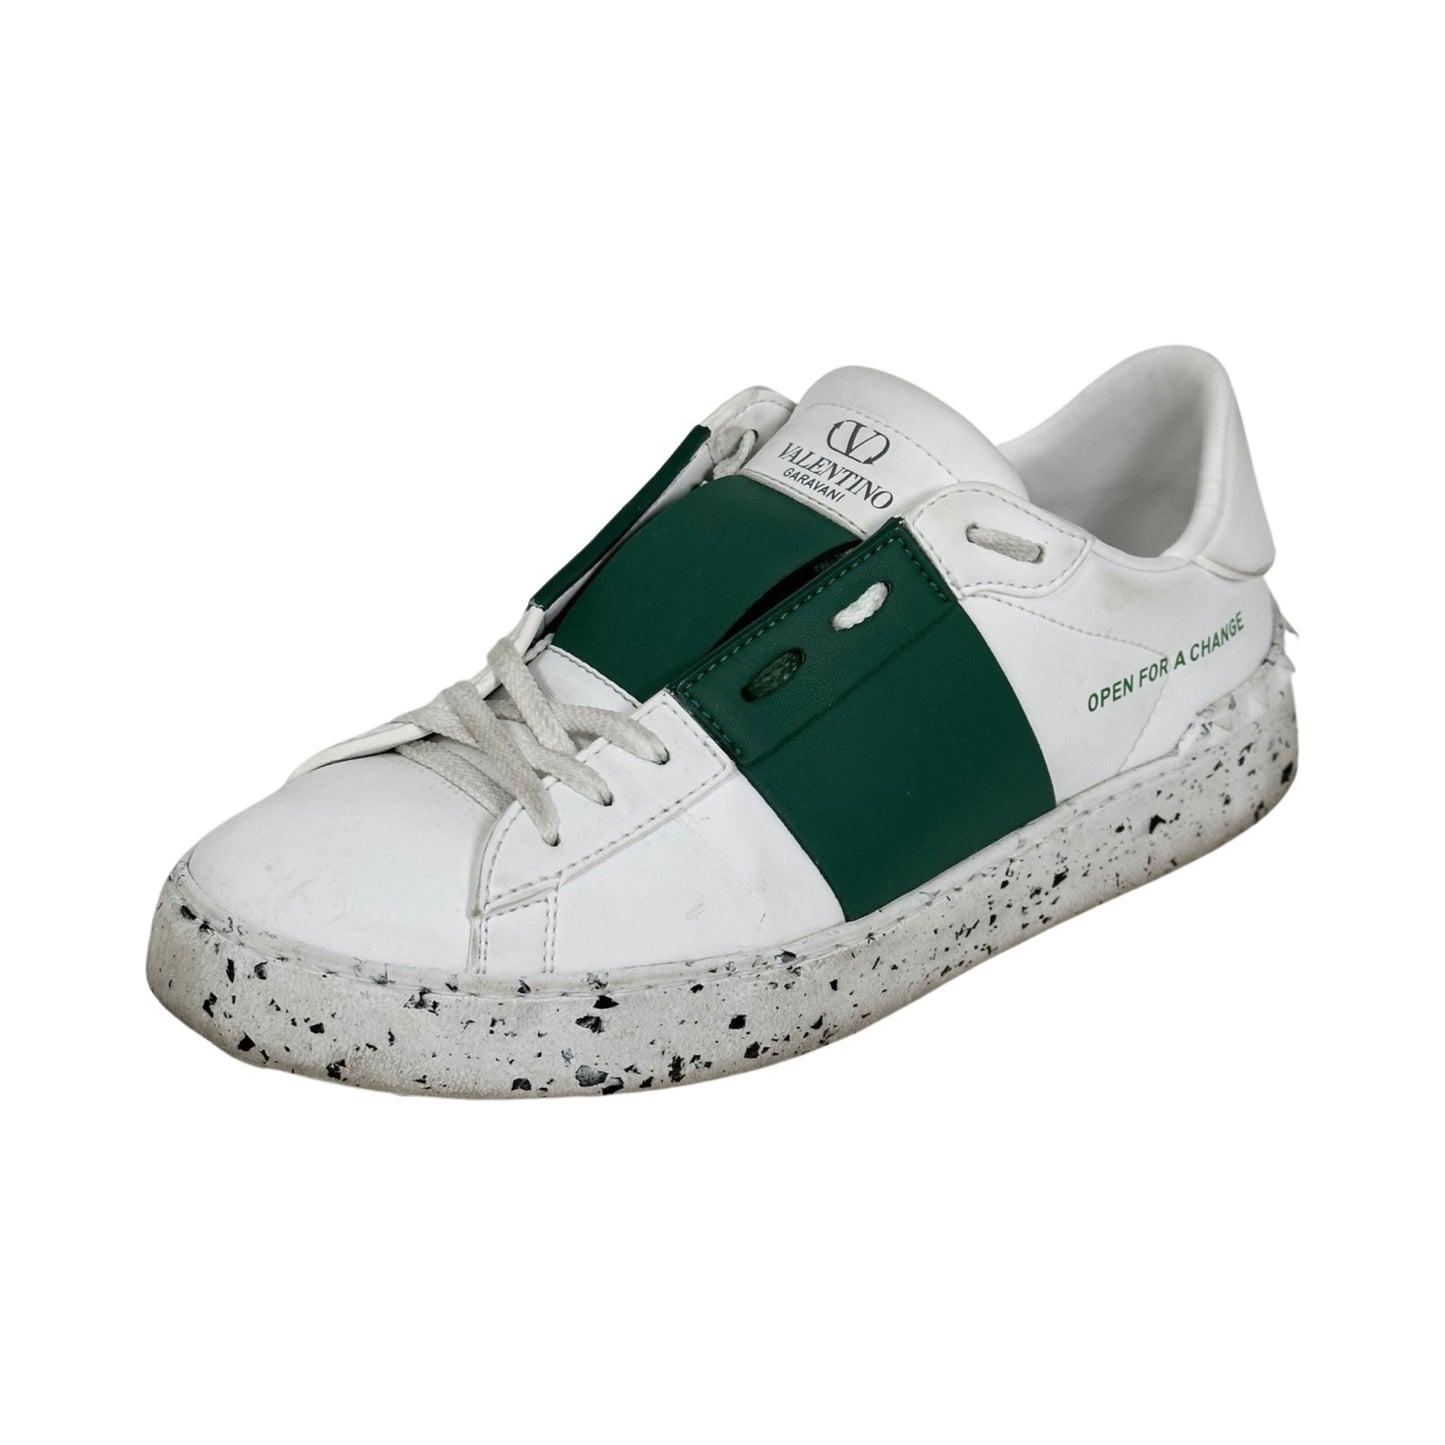 Valentino Open For A Change Sneakers - Size IT 39